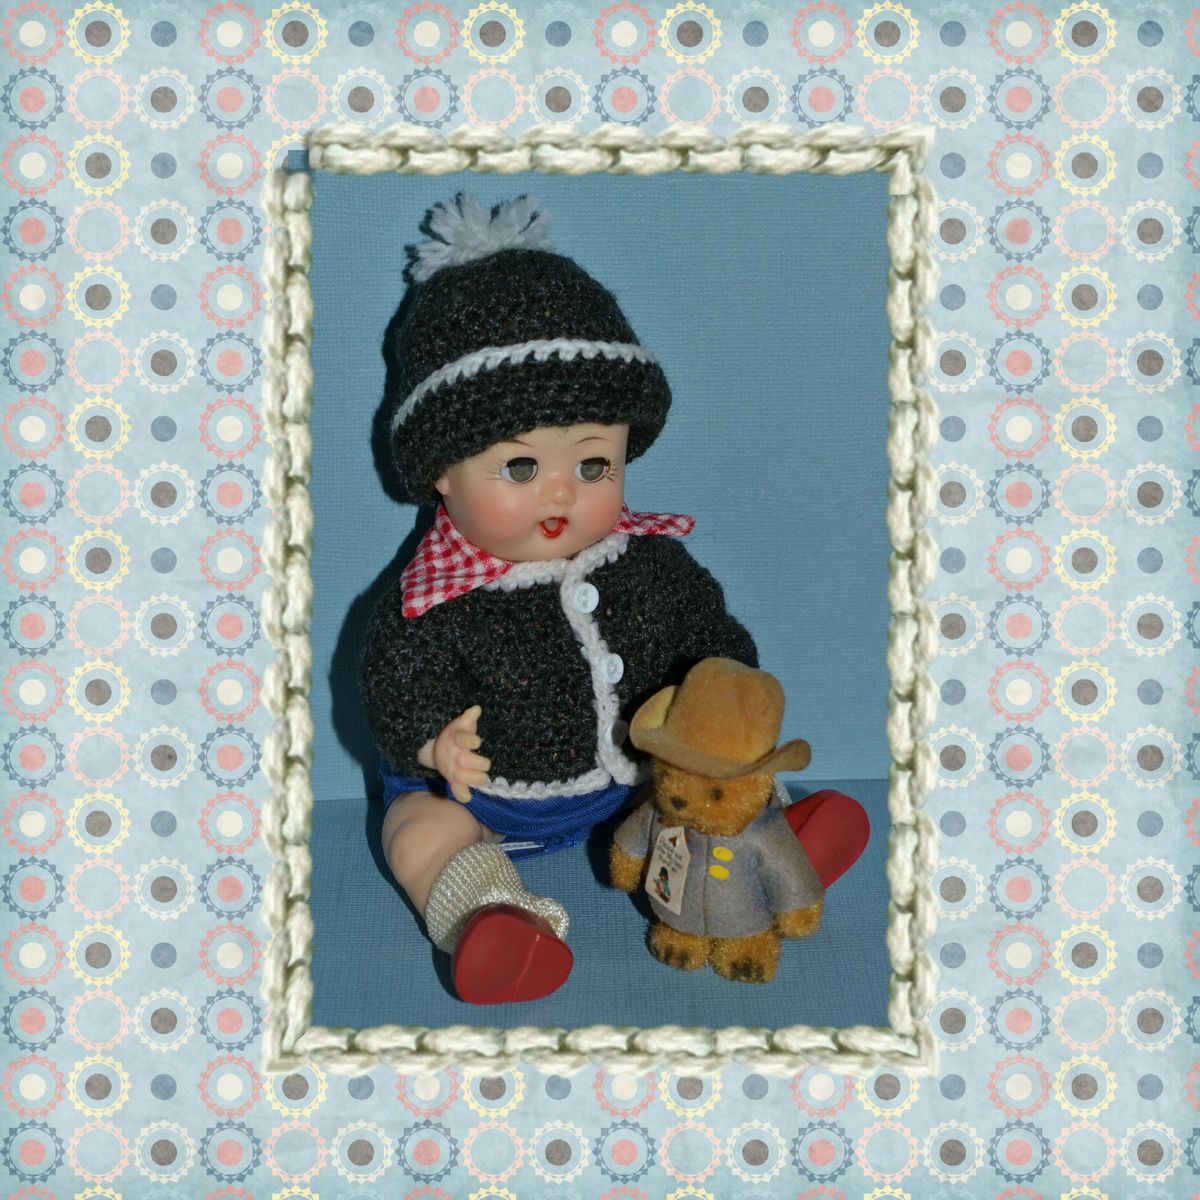 Sweater and Hat to Fit Ideal Little Betsy Wetsy Brother